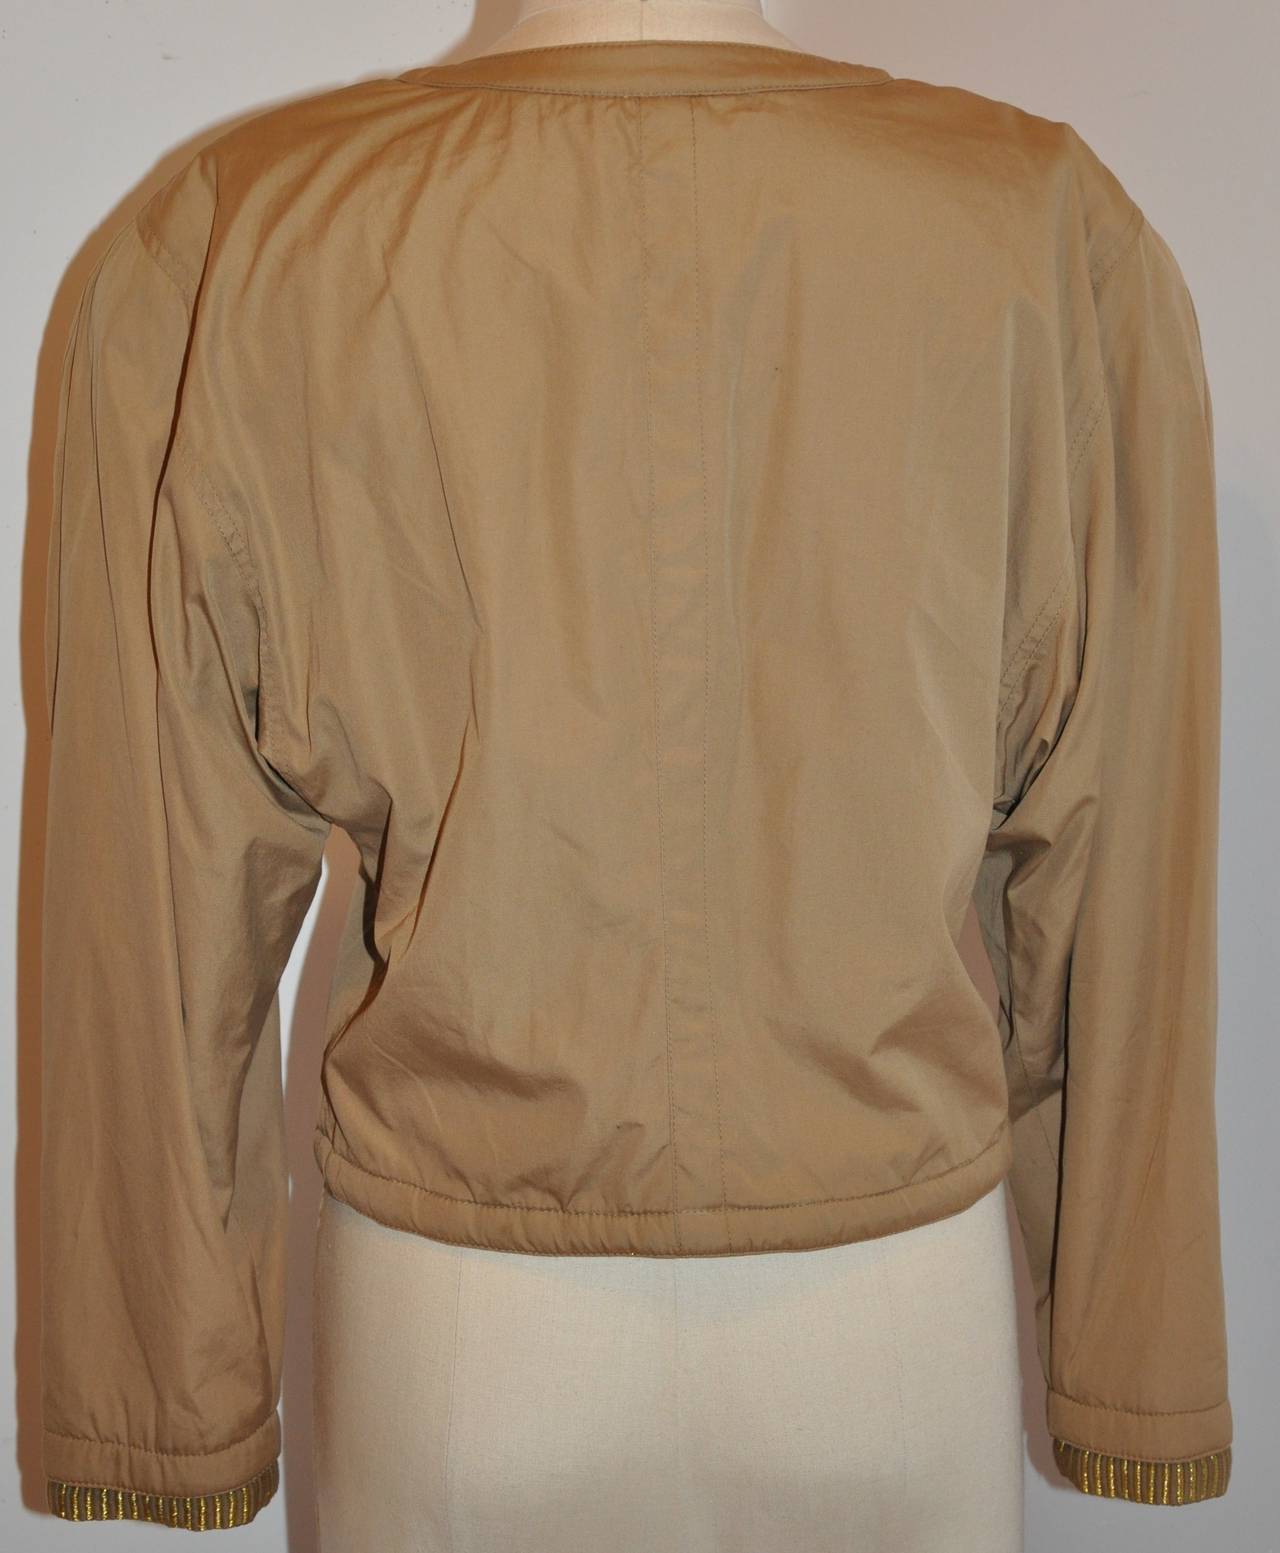 This wonderfully rare detailed Callaghan taupe cropped buttoned jacket is highlighted with a woven combination of taupe and gold lame lining along with detailed hand-embroidered gold lame on the center front and sleeve's cuffs.
   Shoulder are